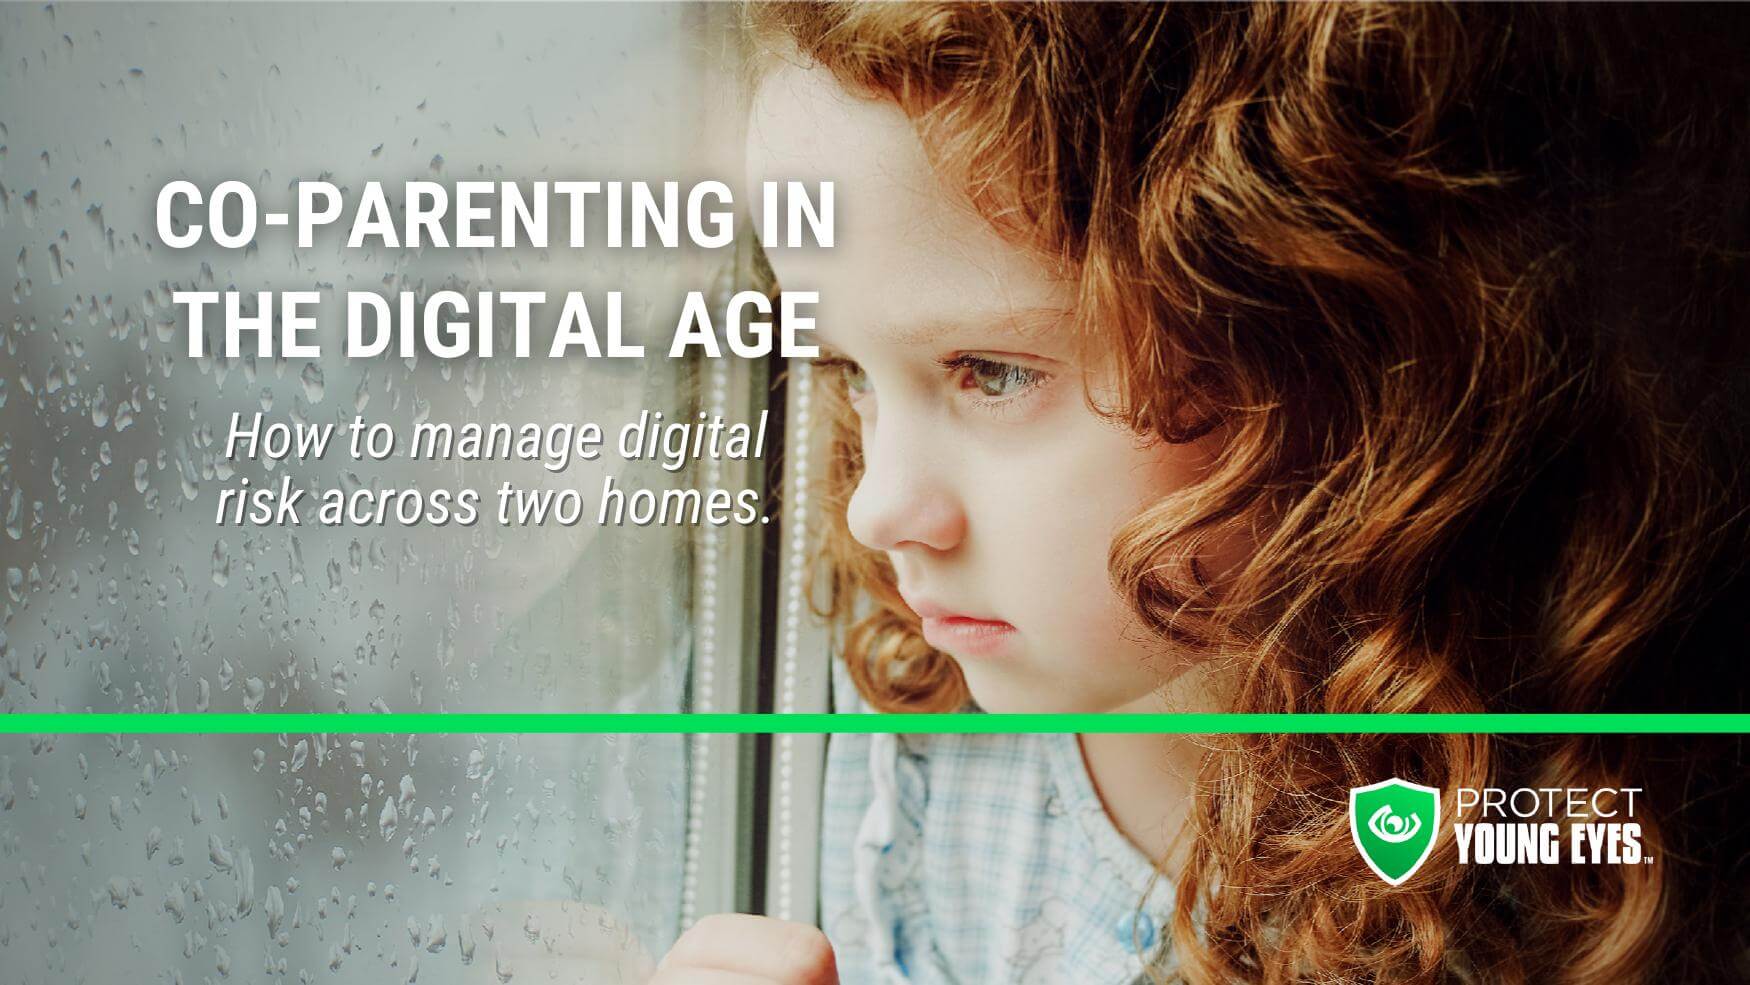 Telugu School Xxx - A Guide to Co-Parenting in the Digital Age - Protect Young Eyes